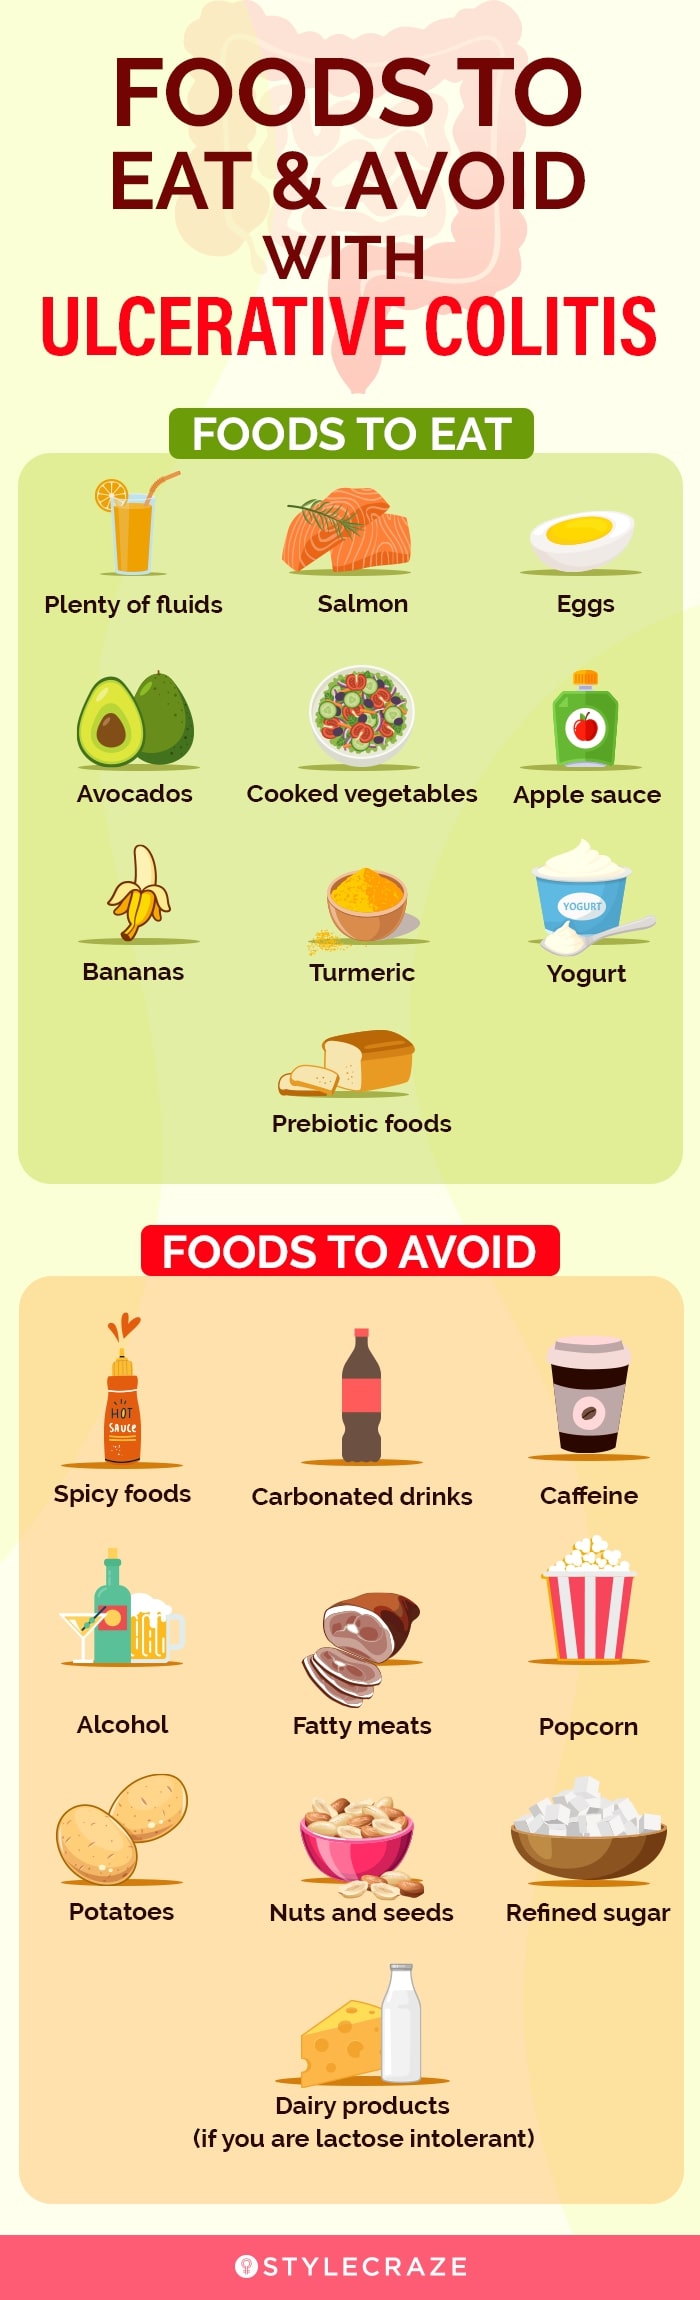 foods to eat and avoid with ulcerative colitis (infographic)